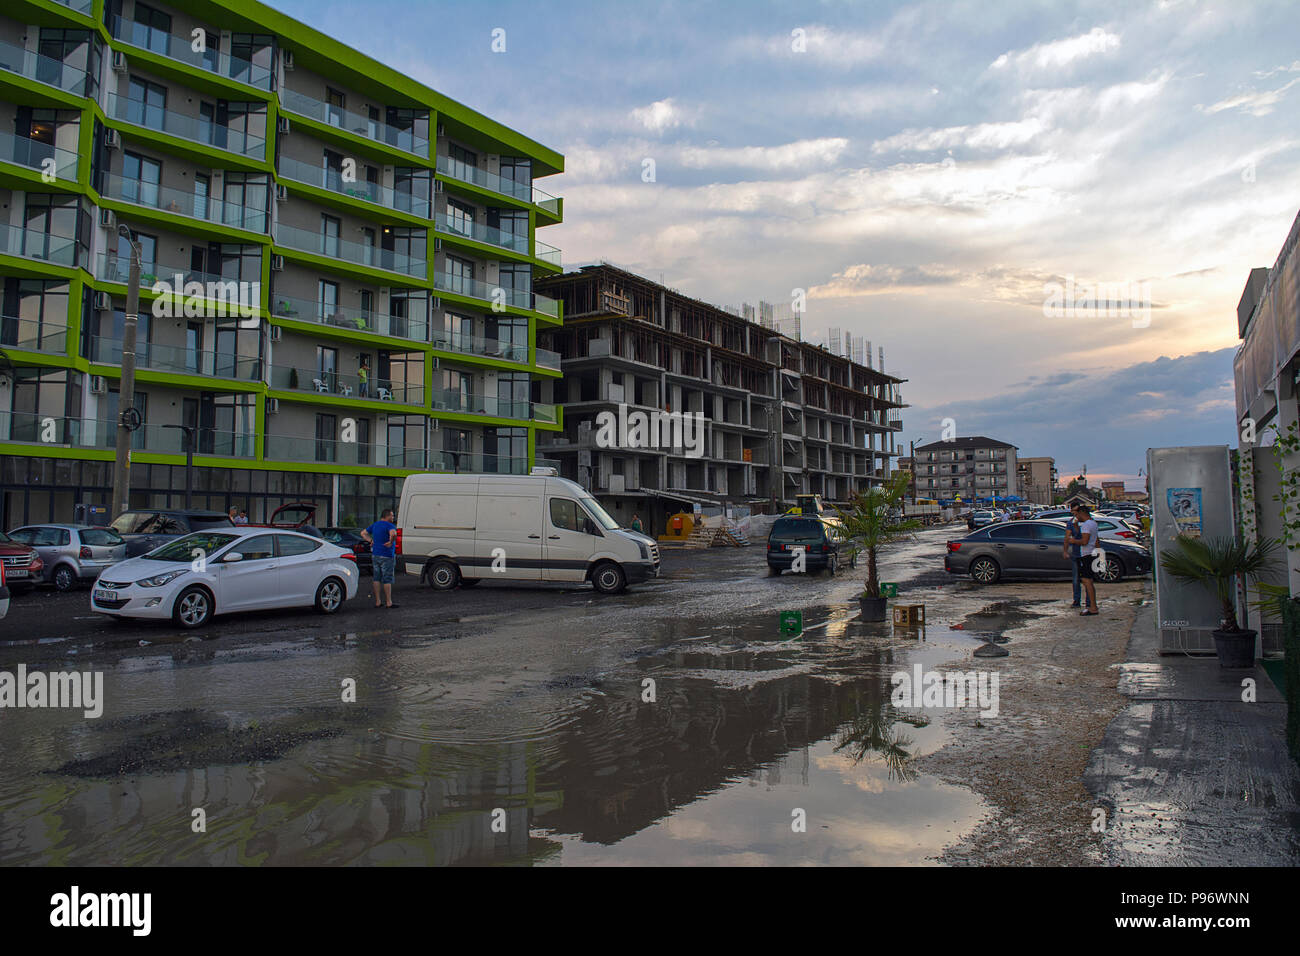 13 July 2018-Mamaia, Romania. The buidlings and terraces after a storm at the sea side with streets flooded at sunset. Stock Photo